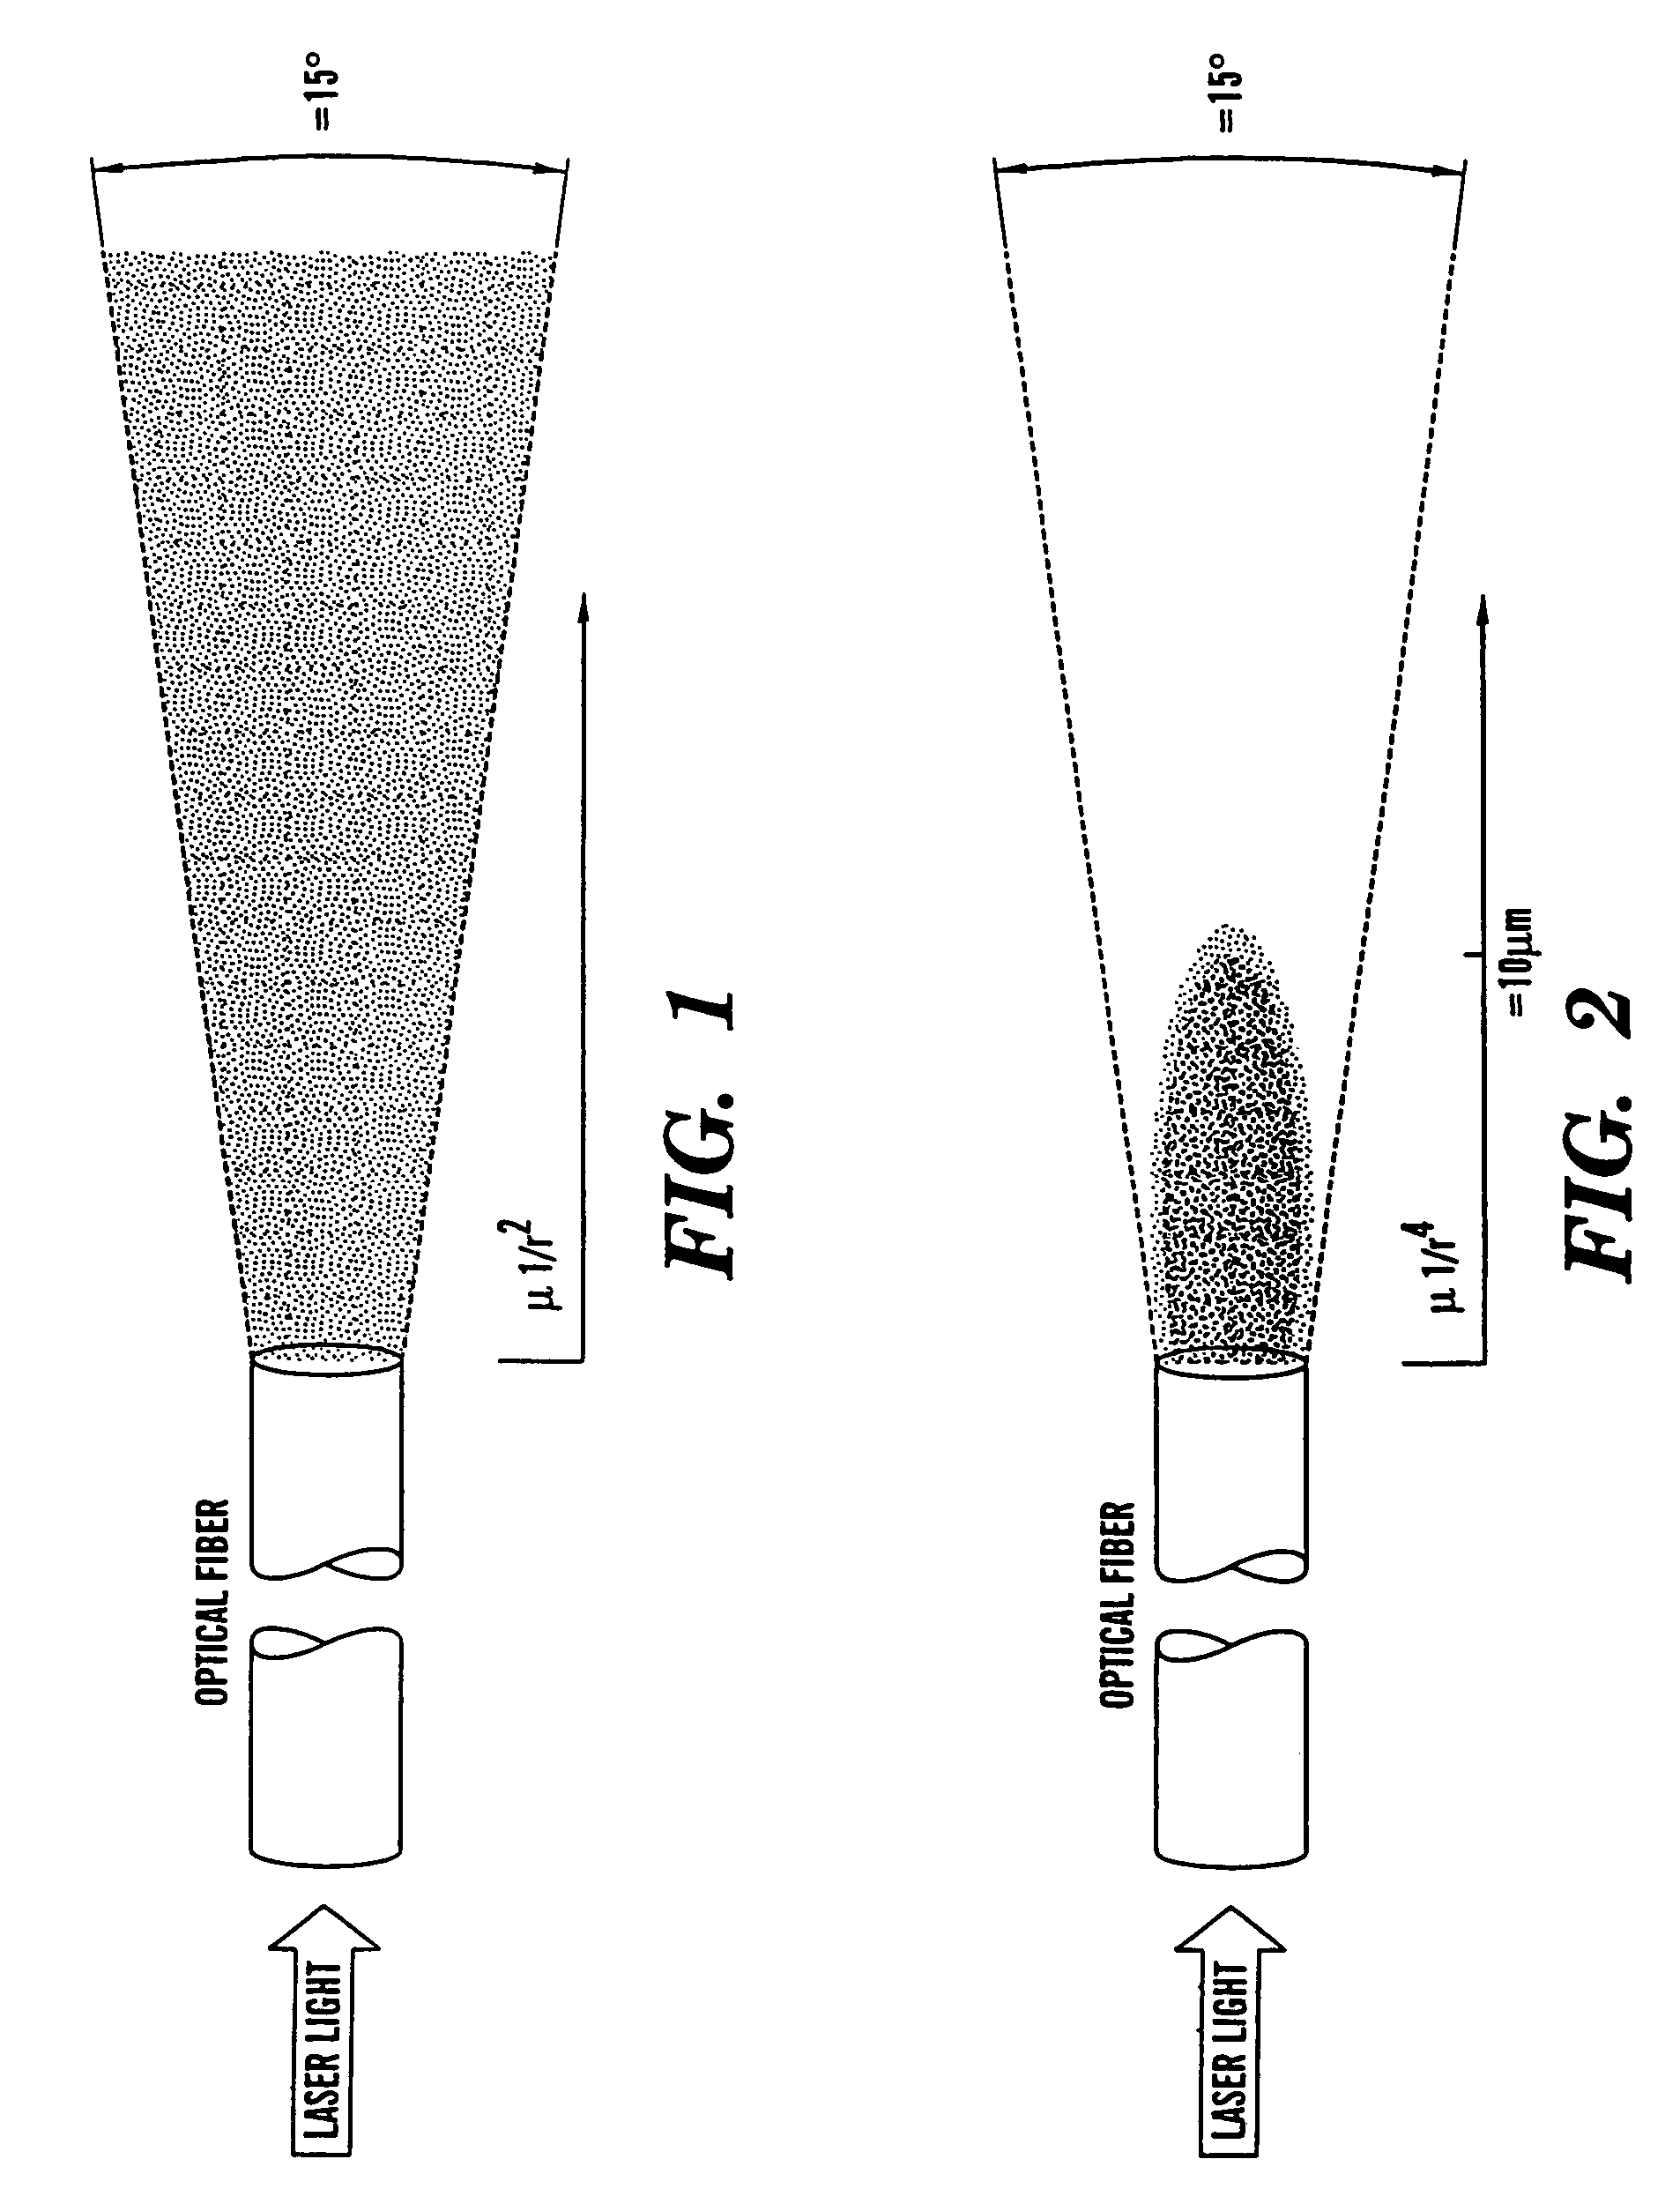 Optical fiber delivery and collection method for biological applications such as multiphoton microscopy, spectroscopy, and endoscopy